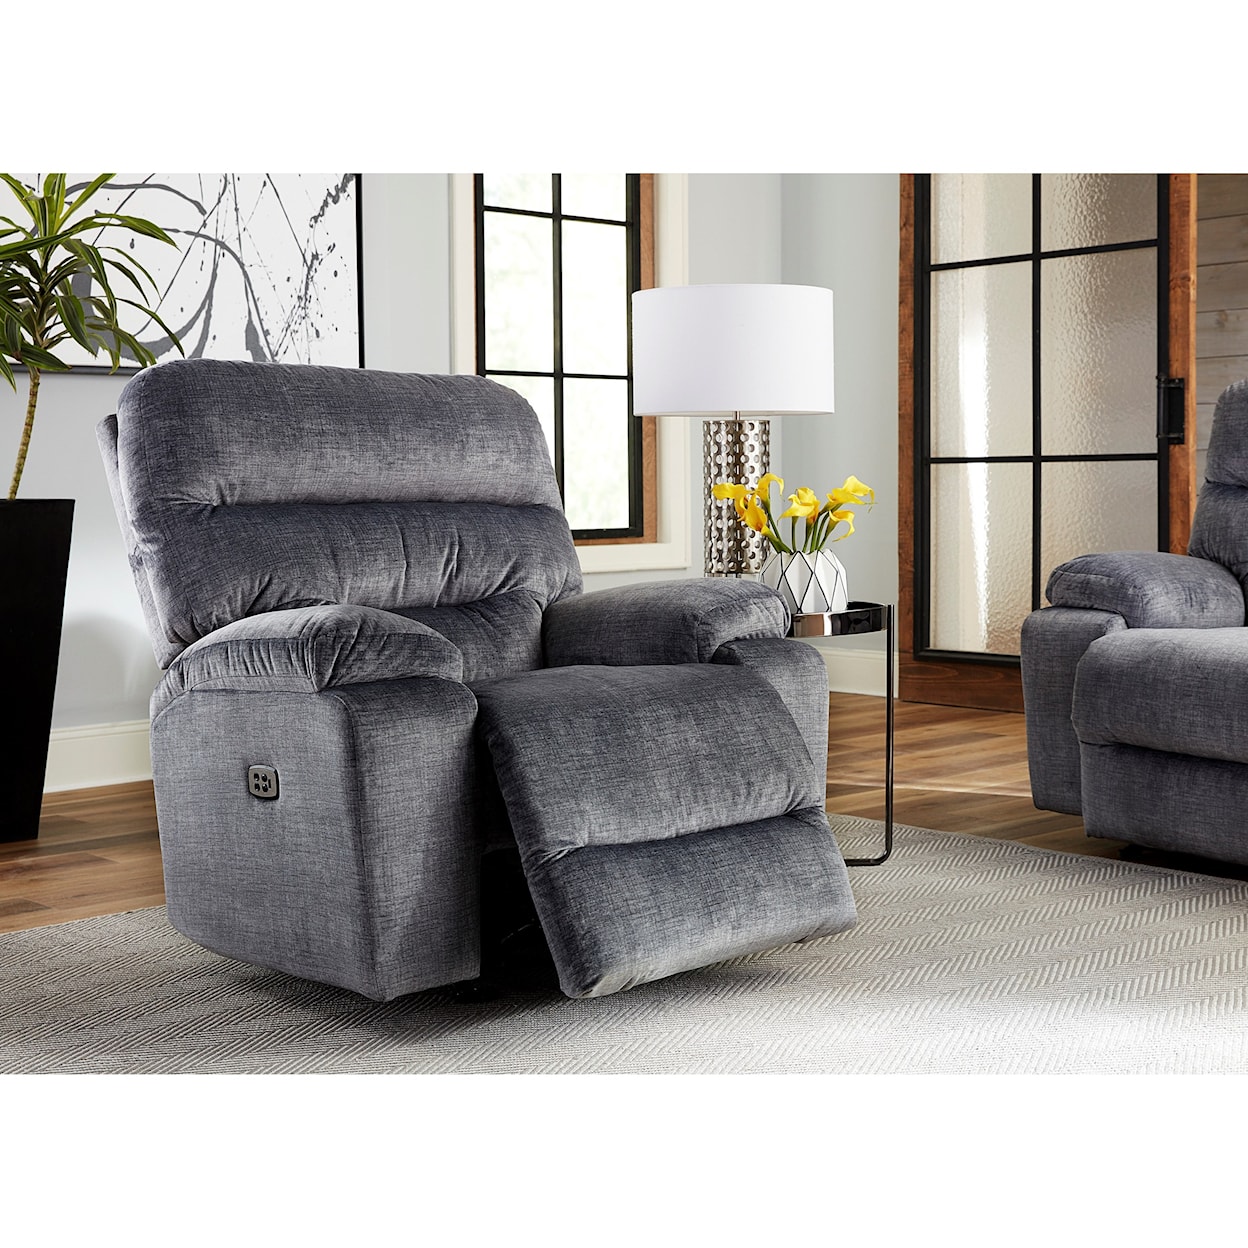 Best Home Furnishings Ryson Space Saver Recliner